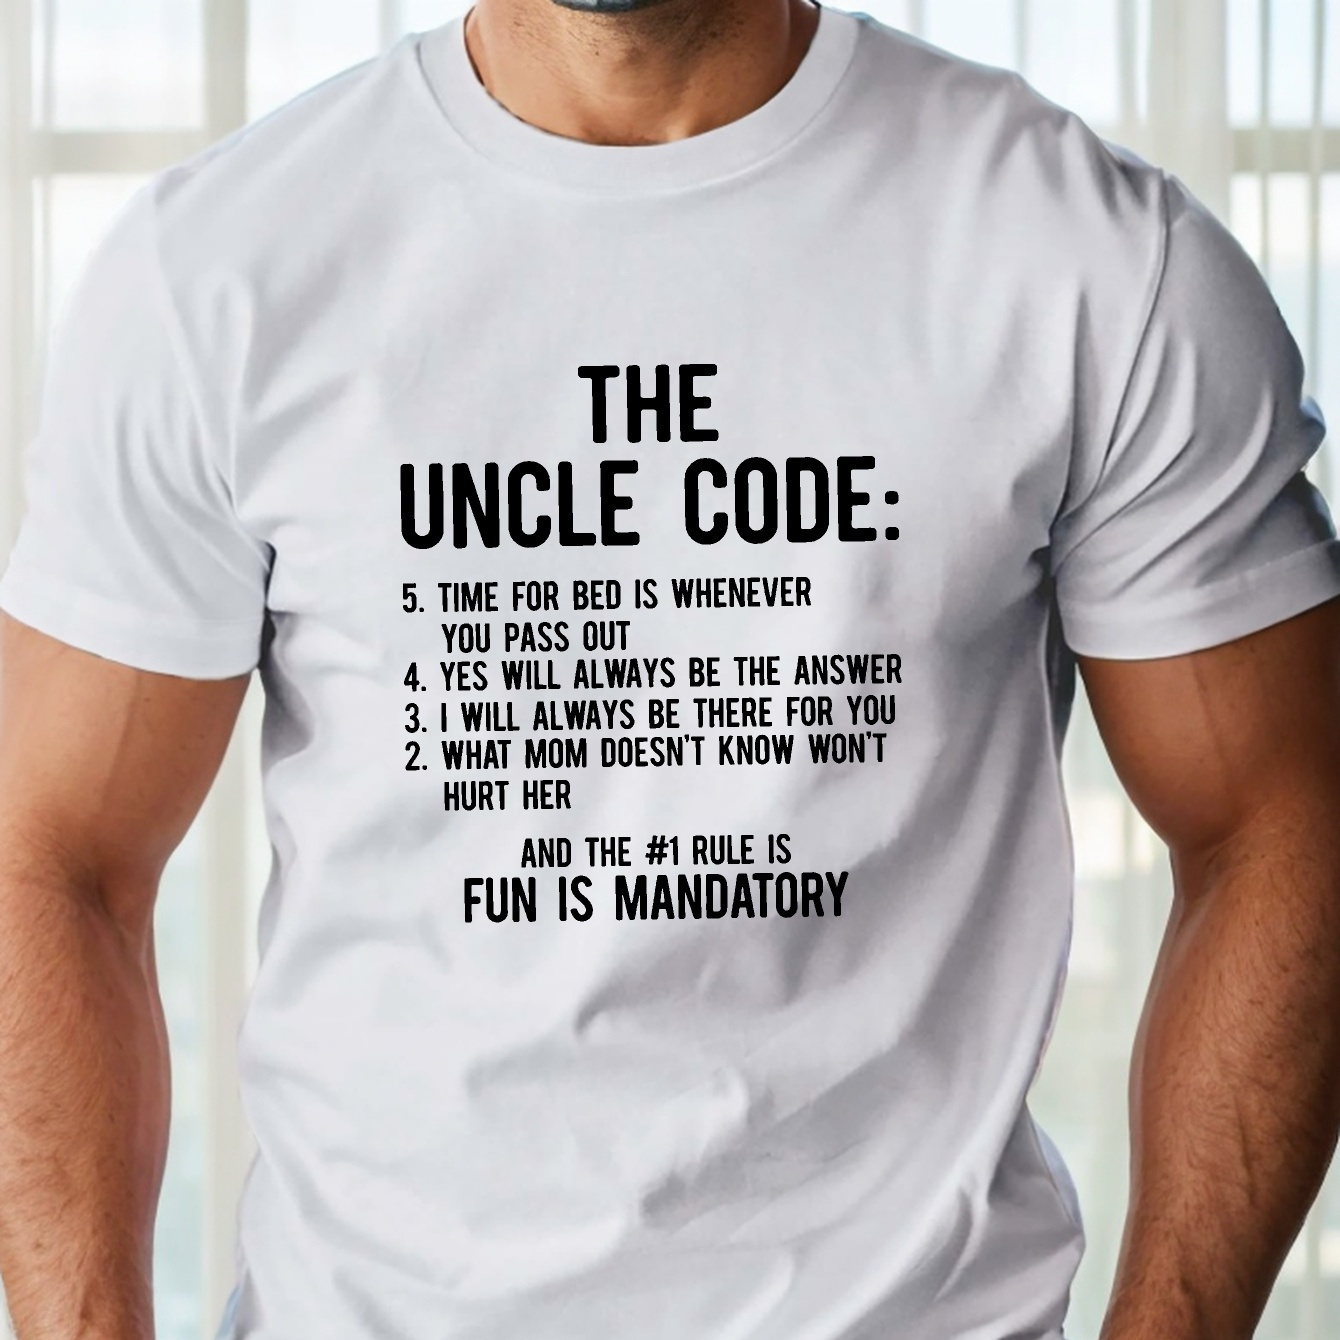 

The Uncle Code Print Pure Cotton Men's T-shirt, Crew Neck Causal Tee, Comfortable Fit, Casual Style, All-season Wear, 1 Pc, 100% Cotton T-shirt